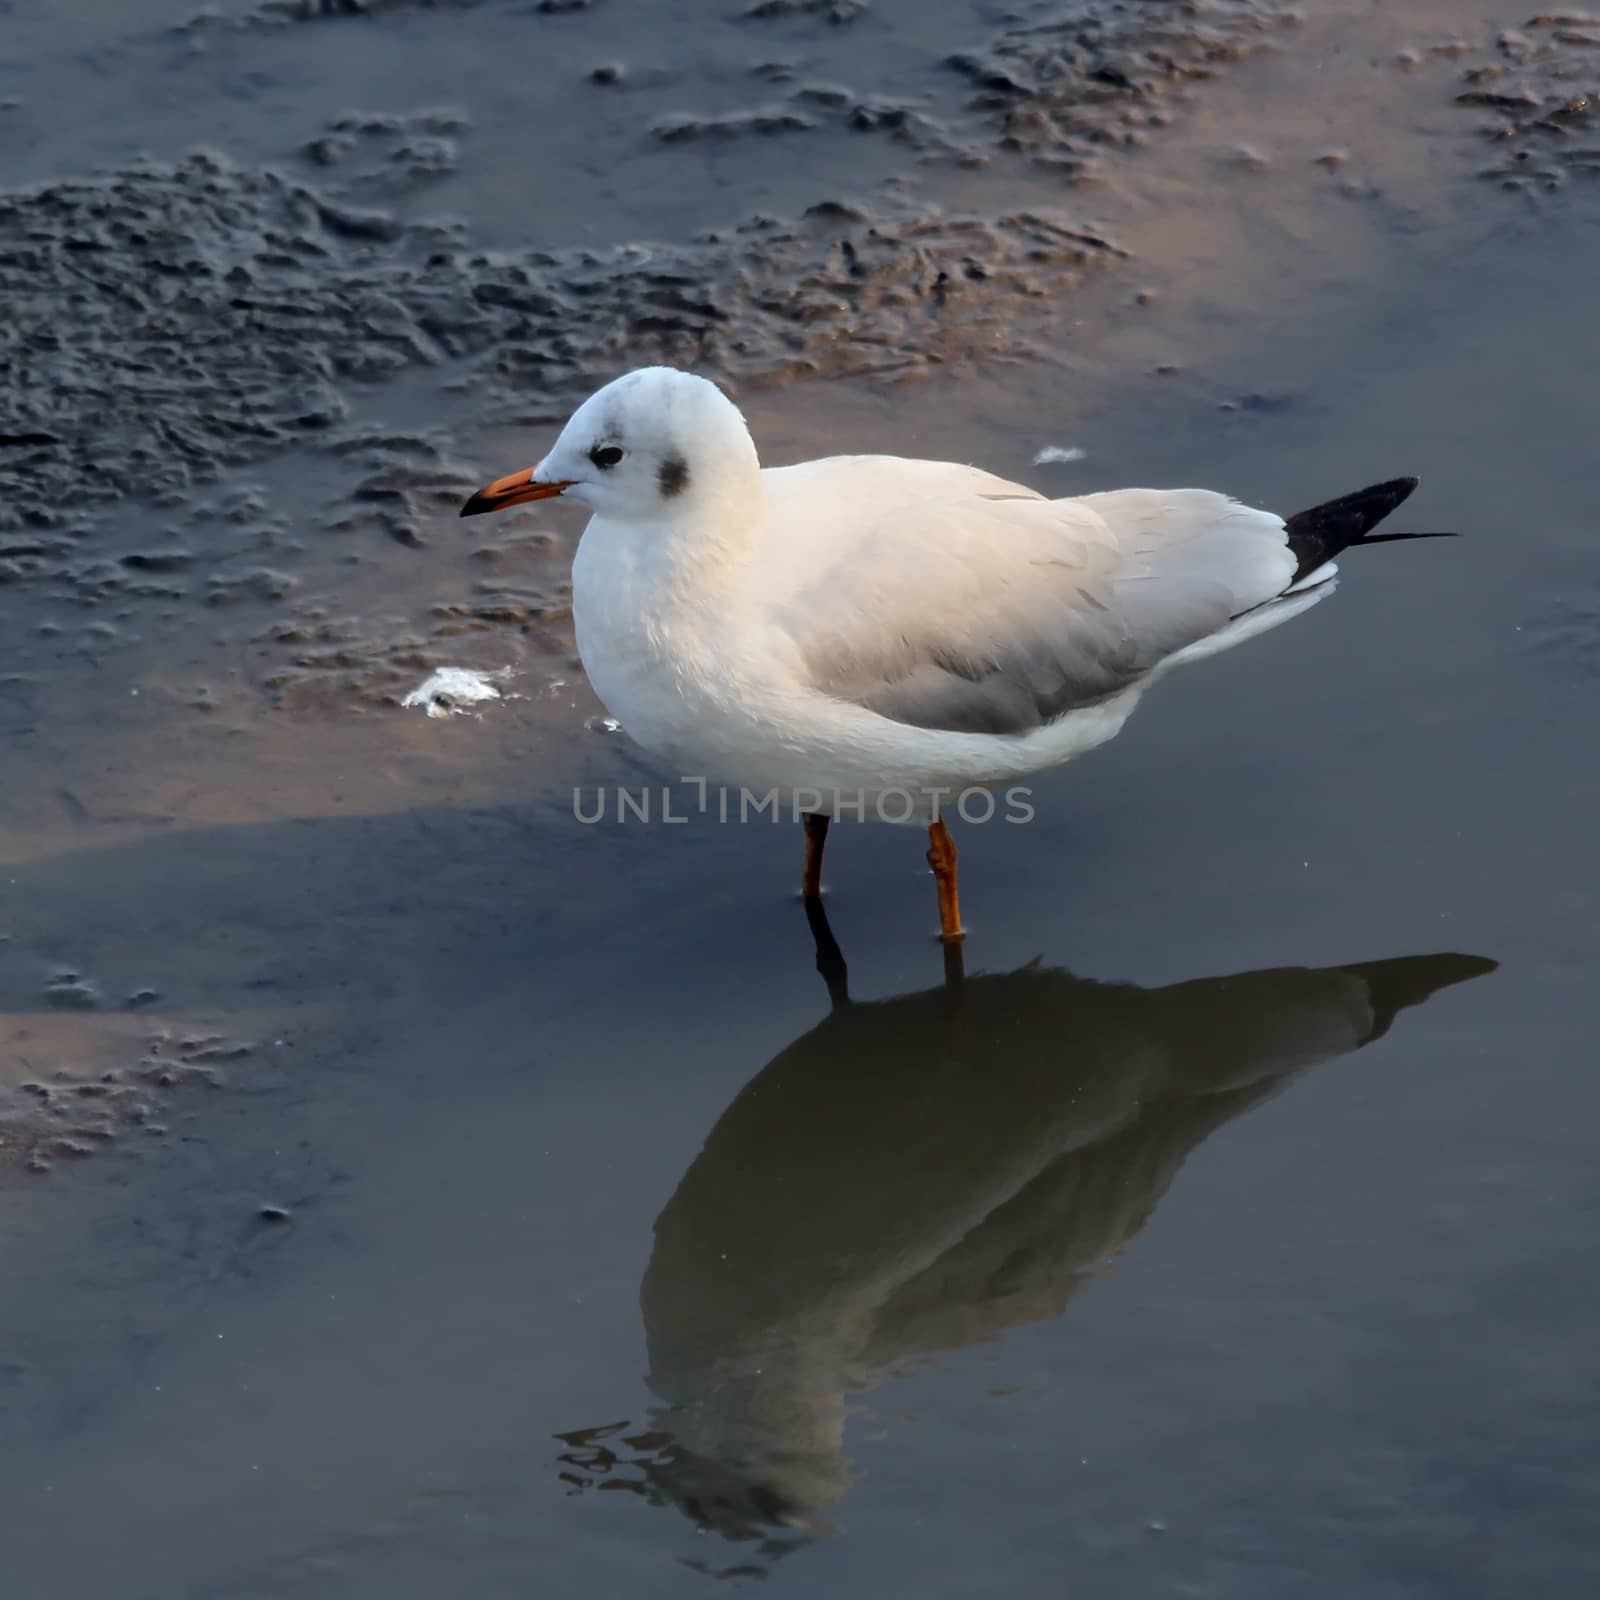 Seagull standing on the ground